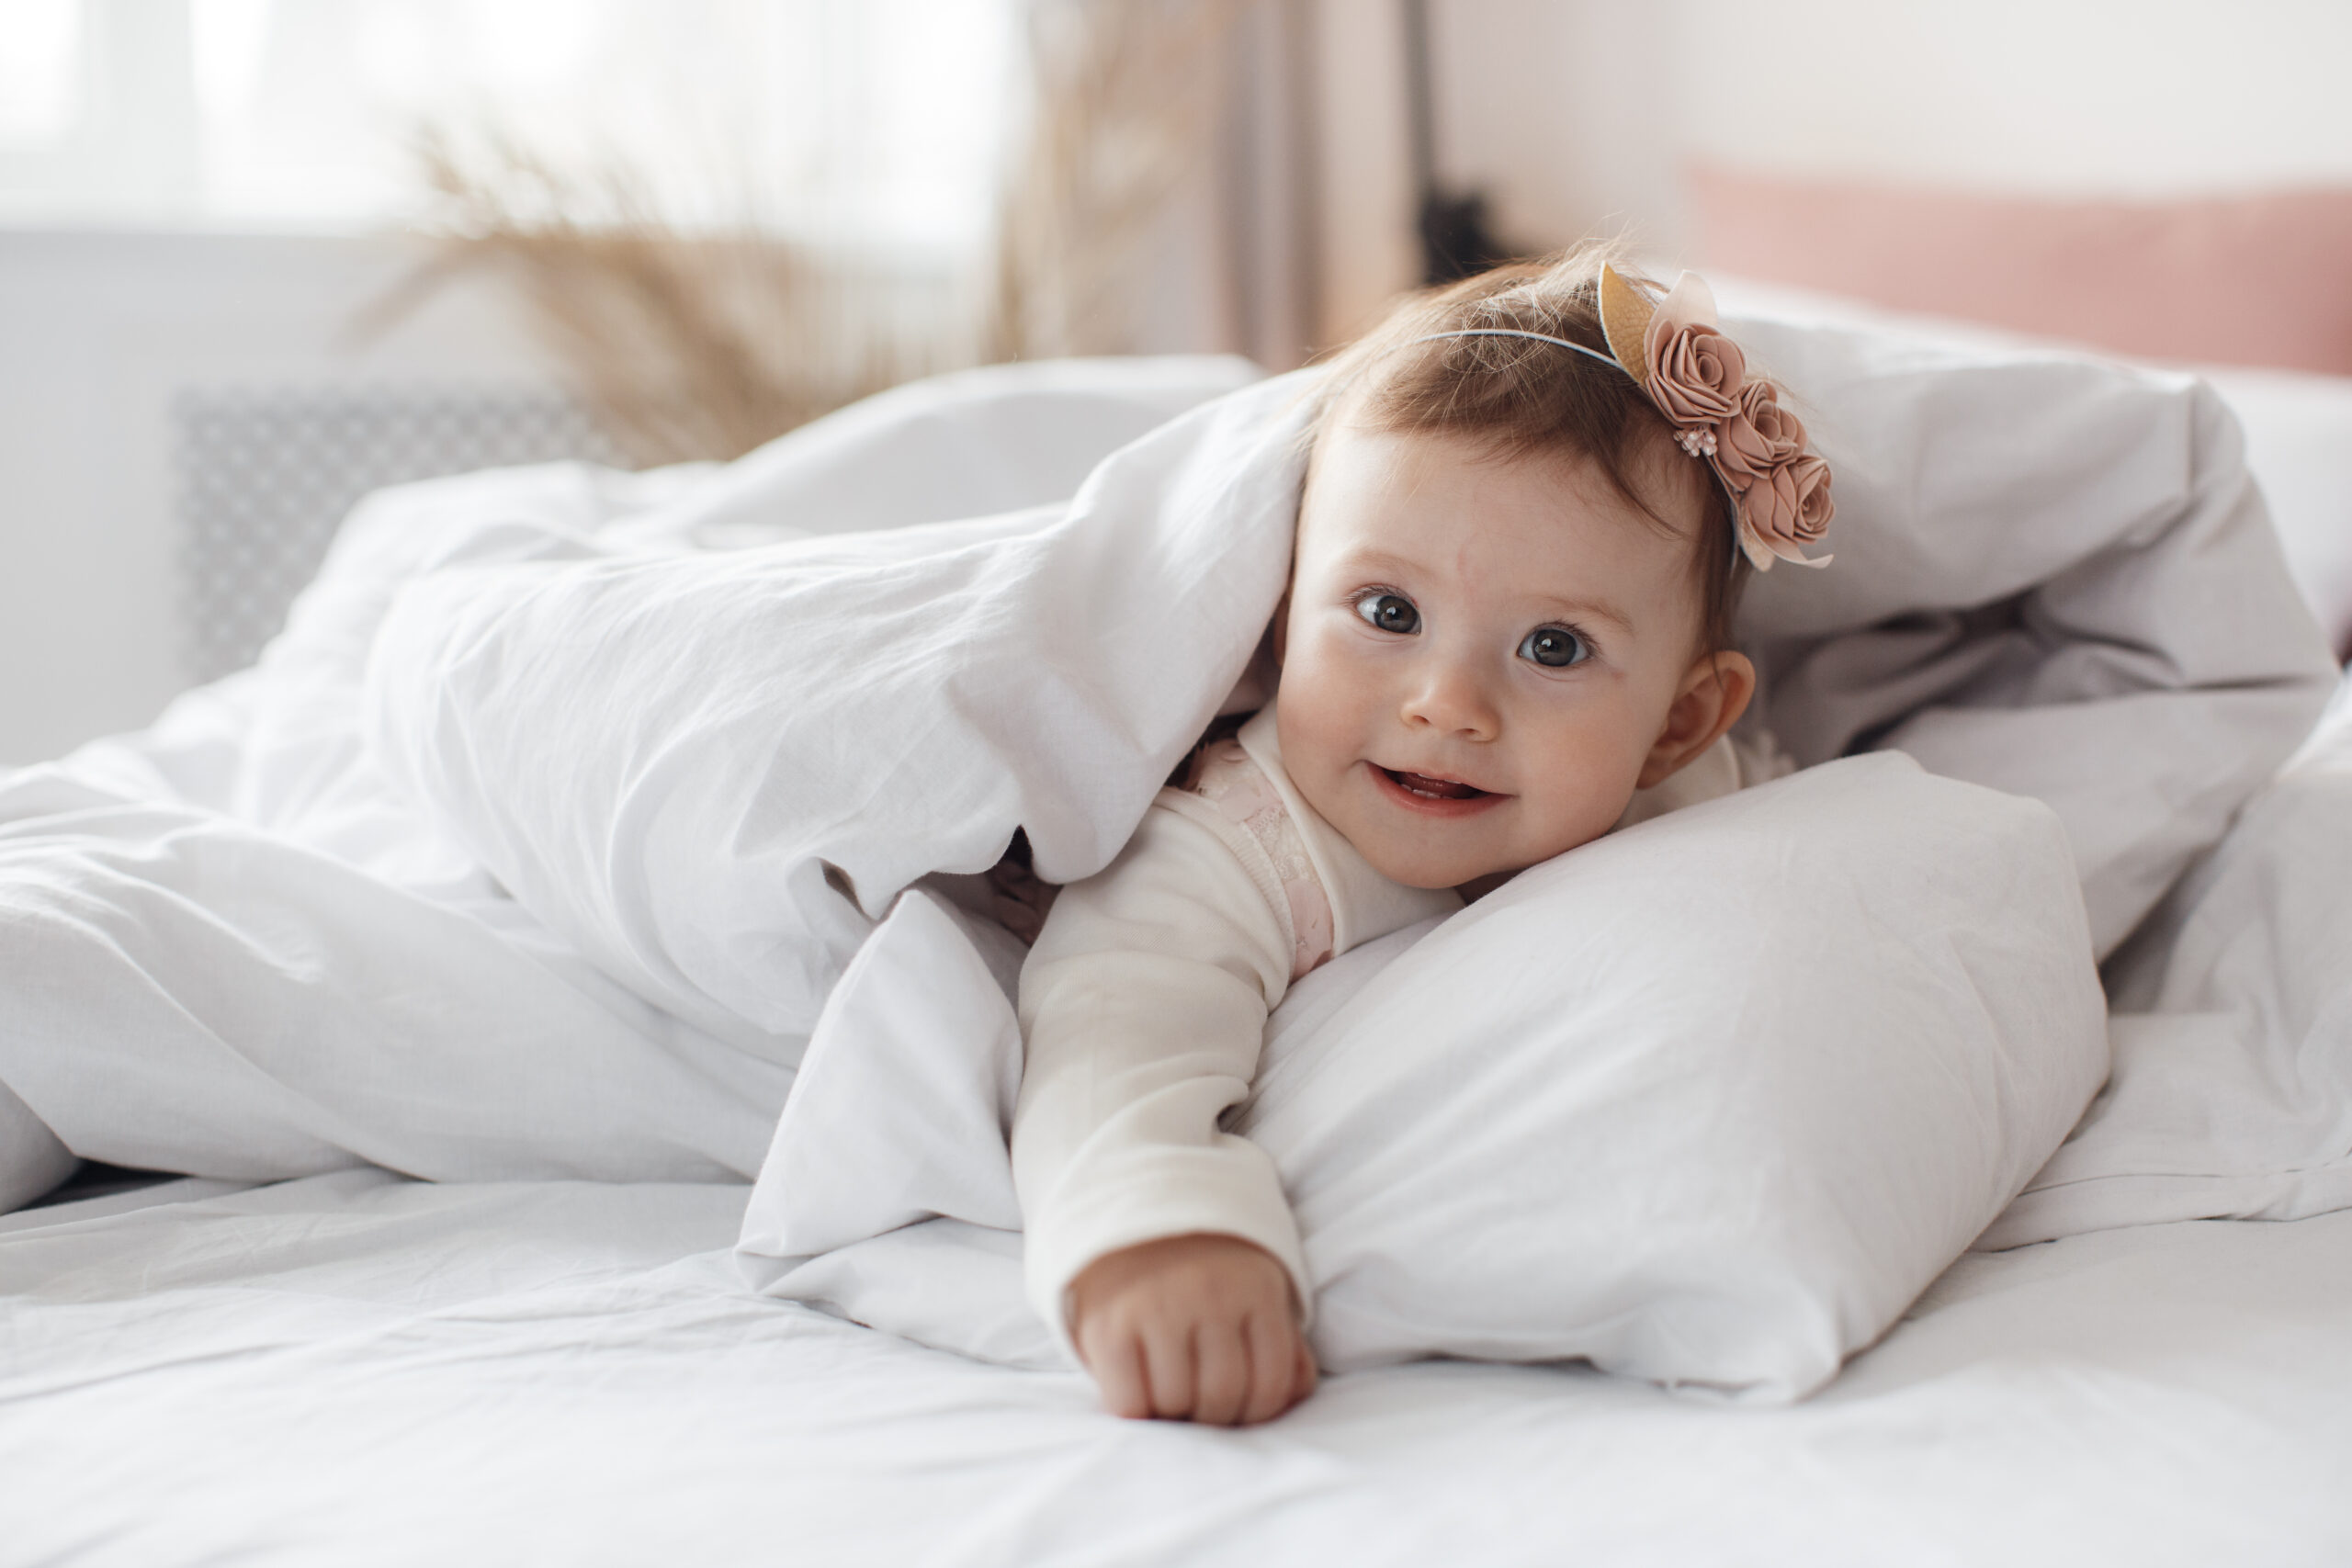 Duvet vs. Comforter: What’s the Difference?